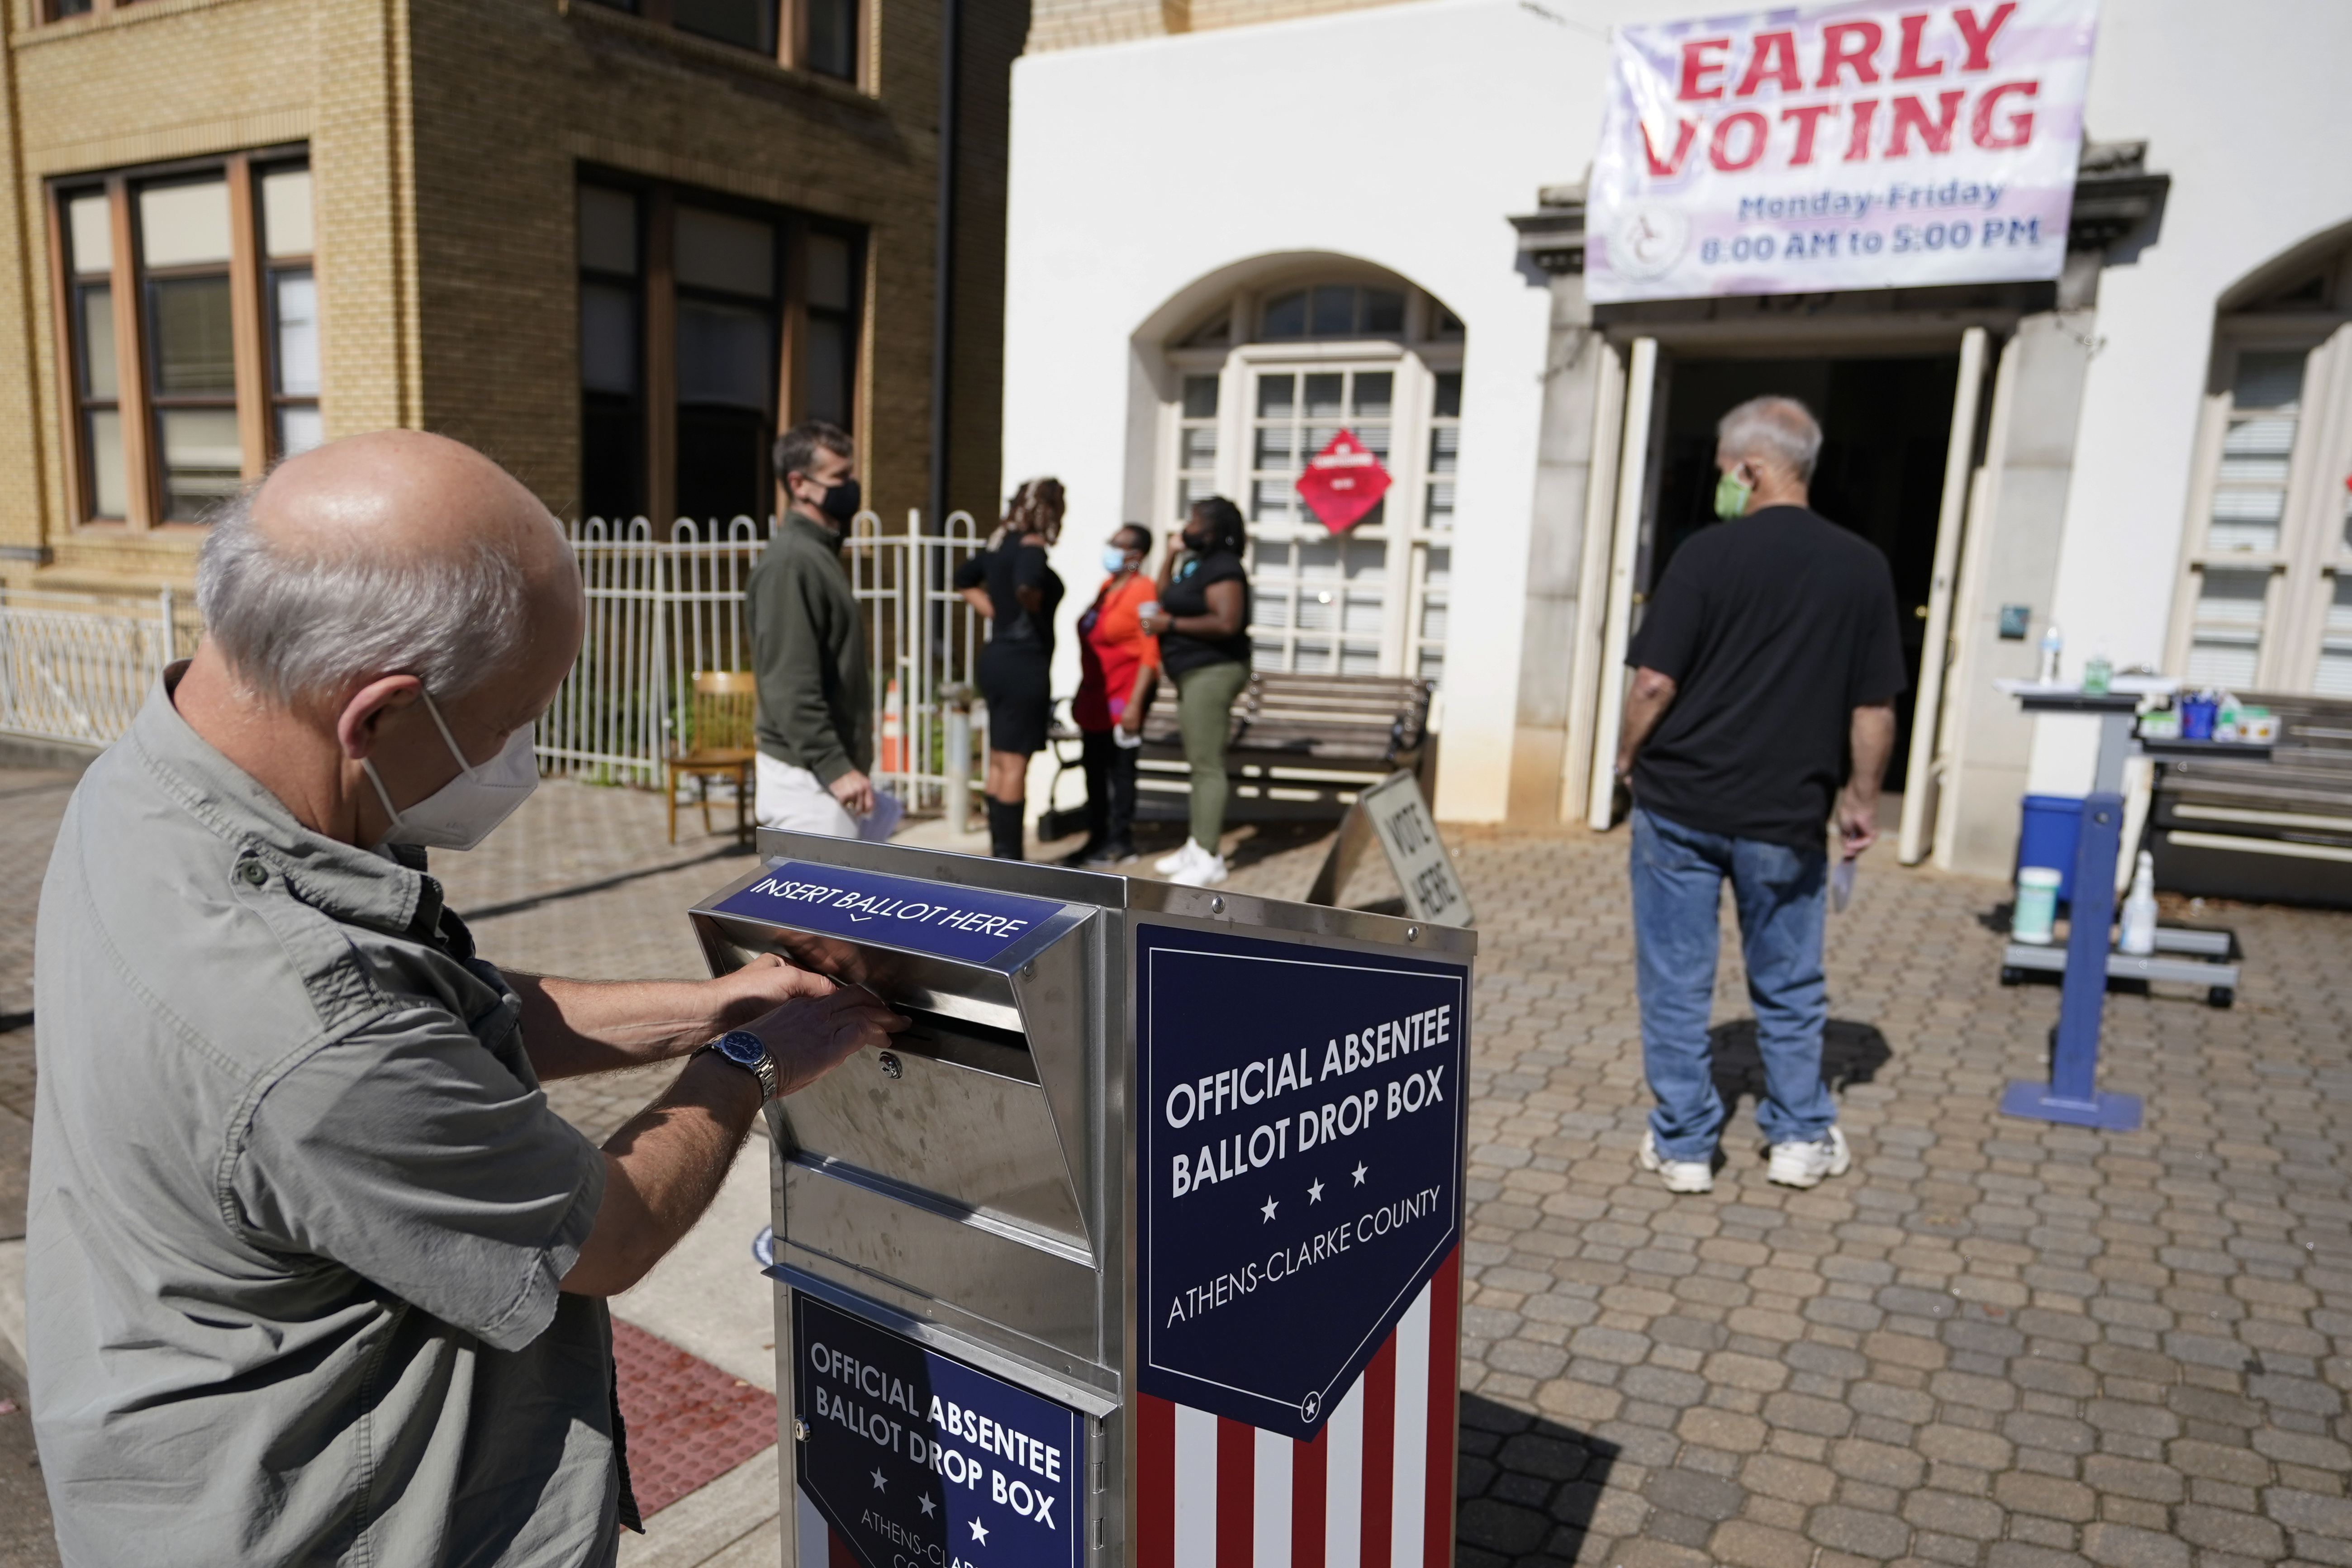 A voter submits a ballot in an official drop box during early voting in October 2020.